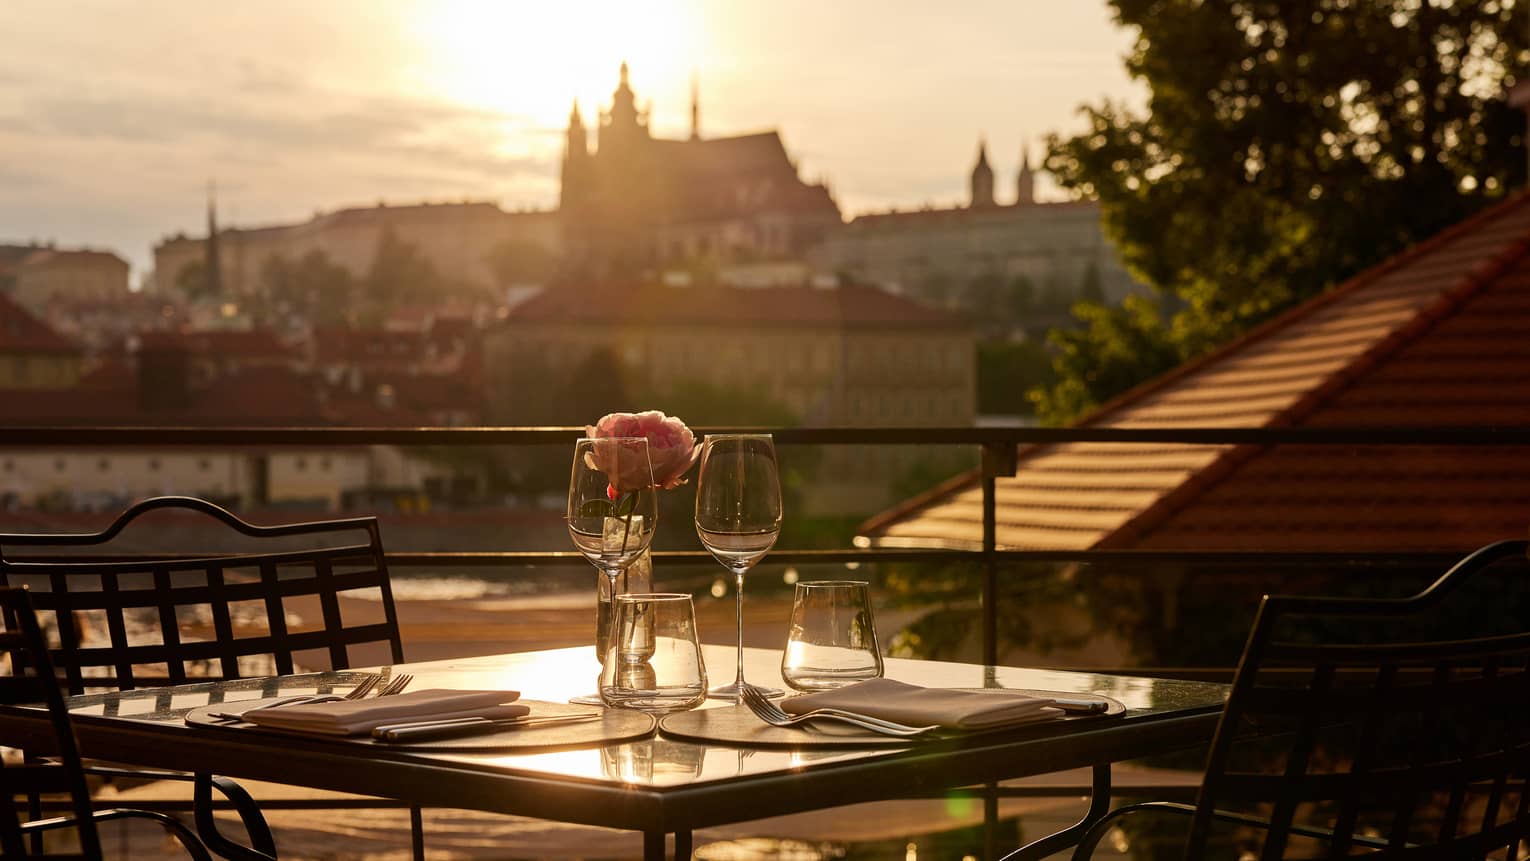 Terrace dining setup at sunset with view of Prague Castle in backdrop